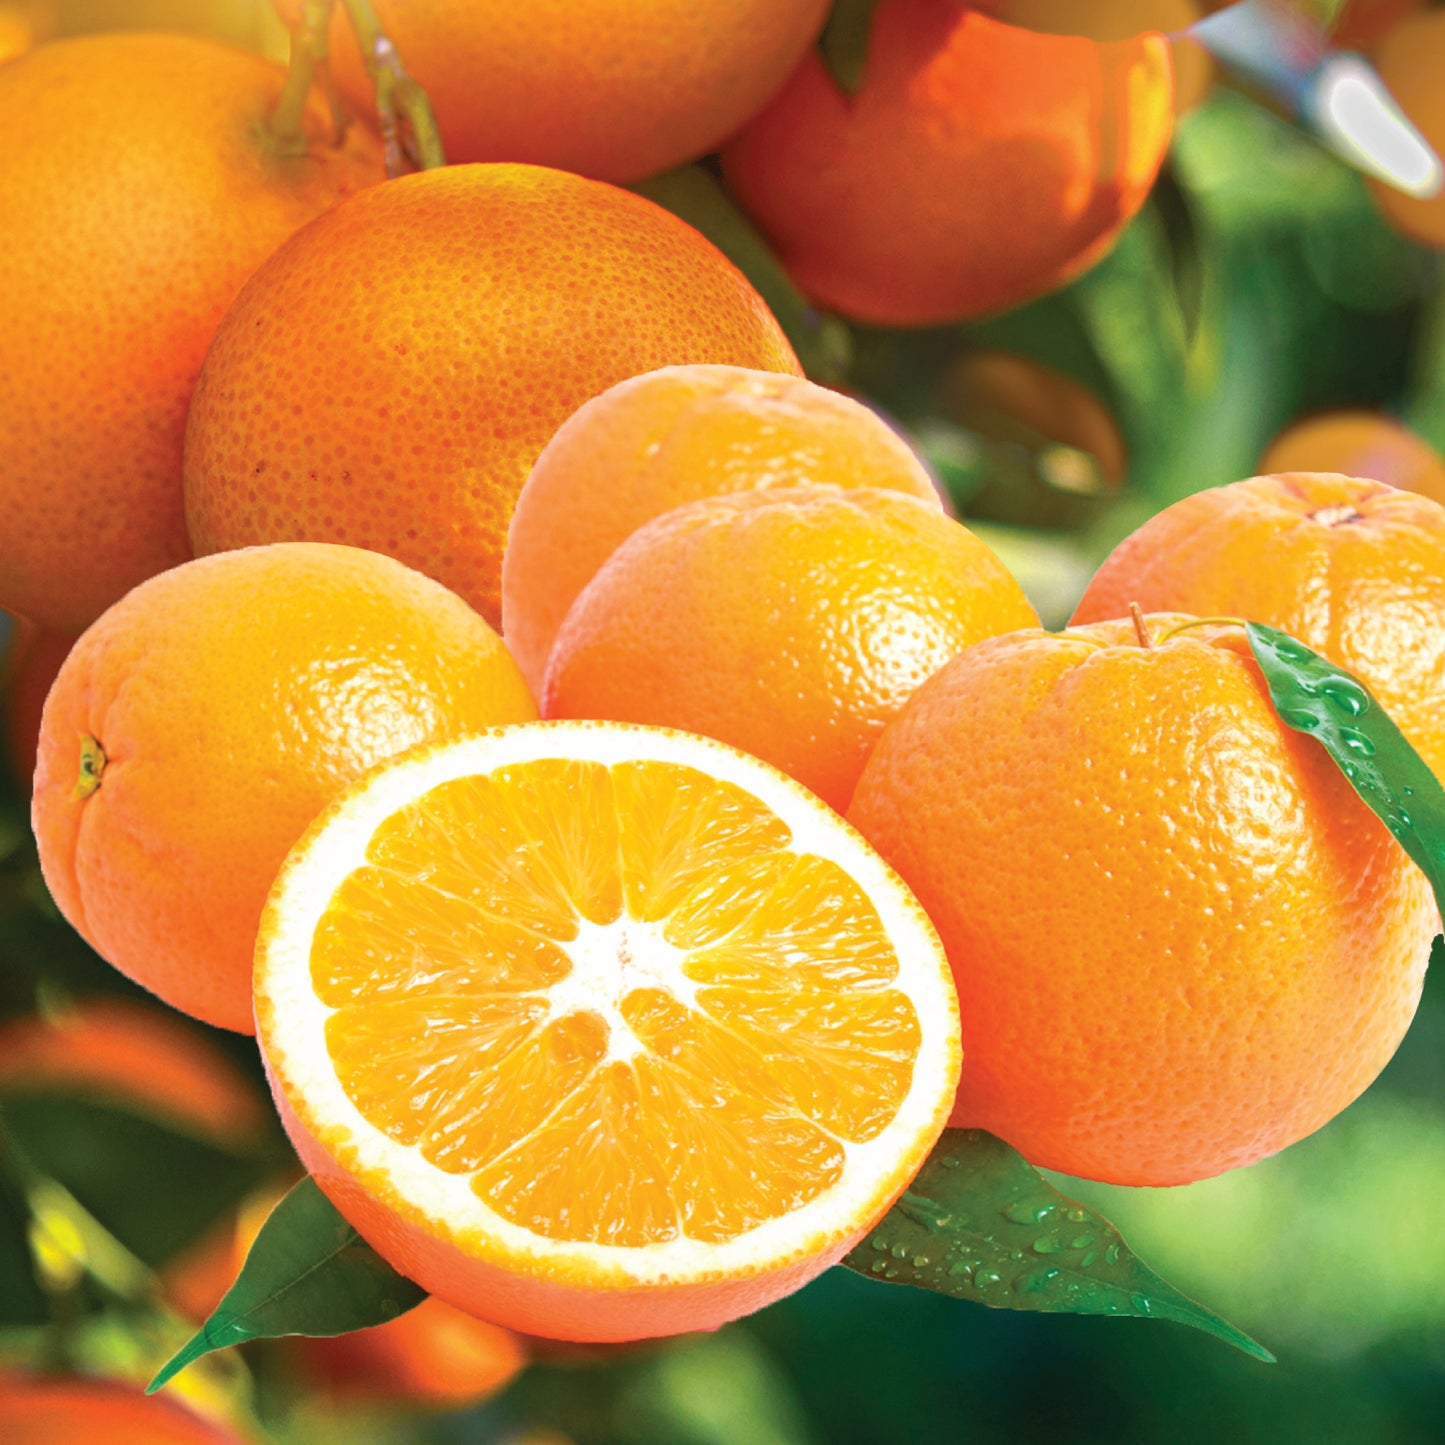 Royal Navel Oranges (Available Mid-February to March)